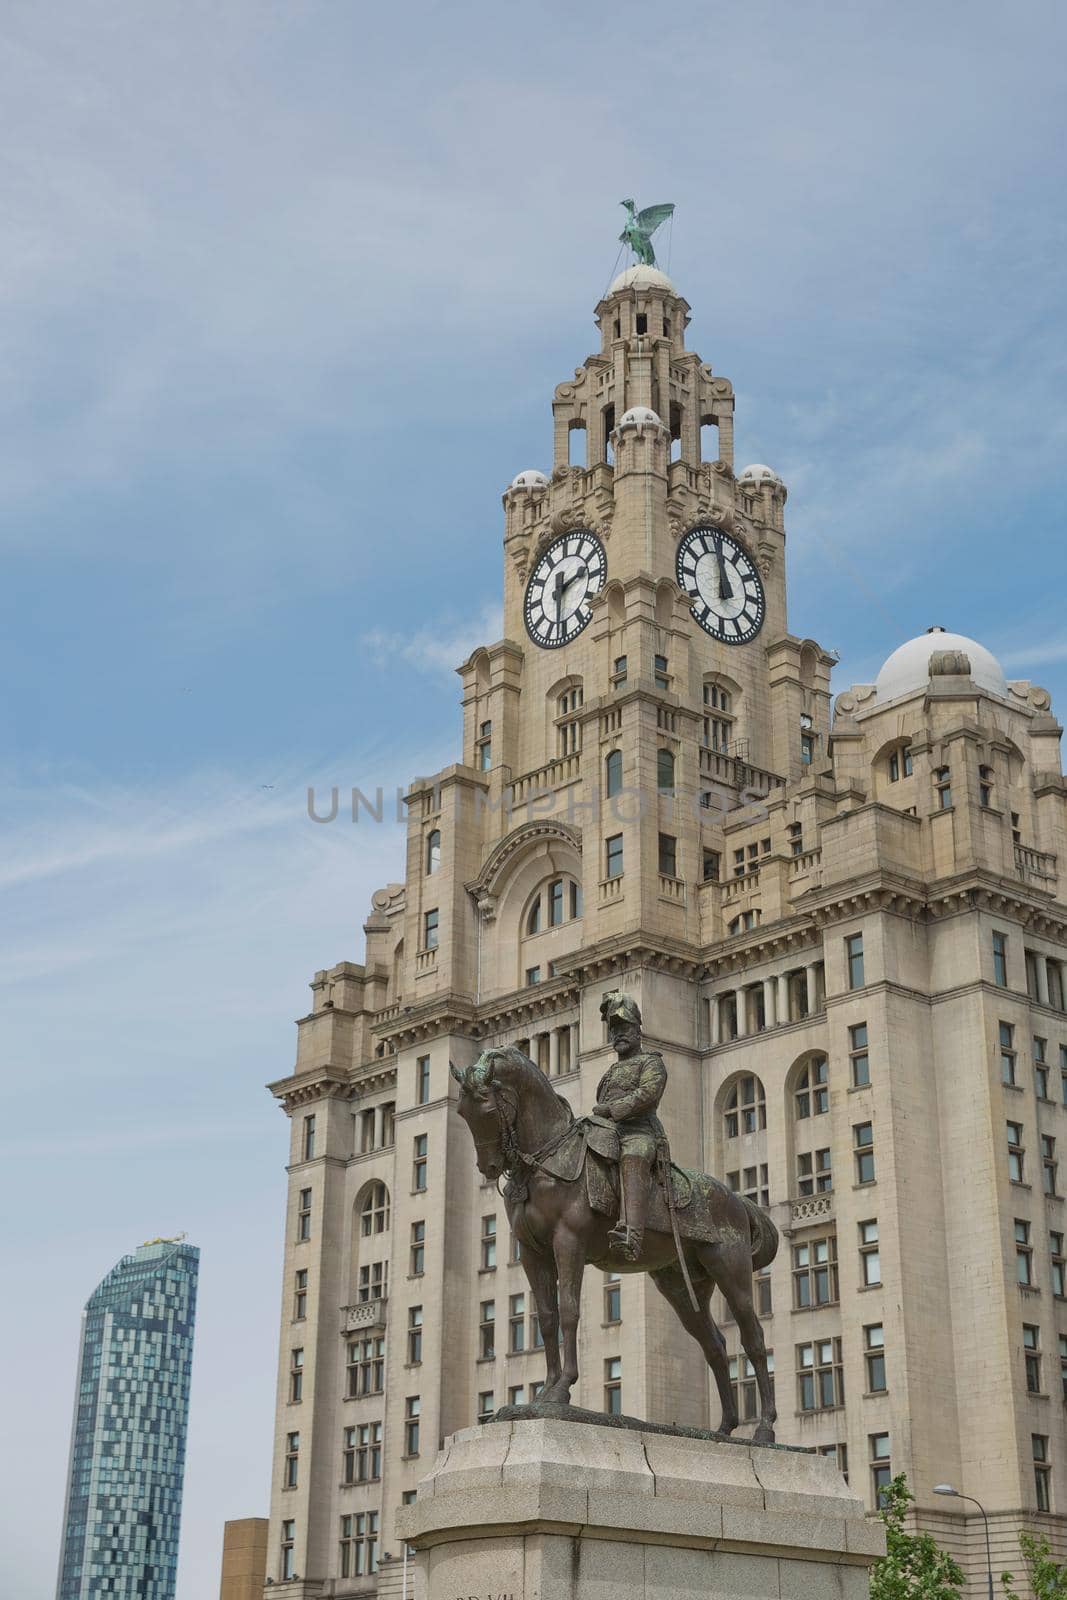 Liverpool's Historic Liver Building and Clocktower, Liverpool, England, United Kingdom by wondry